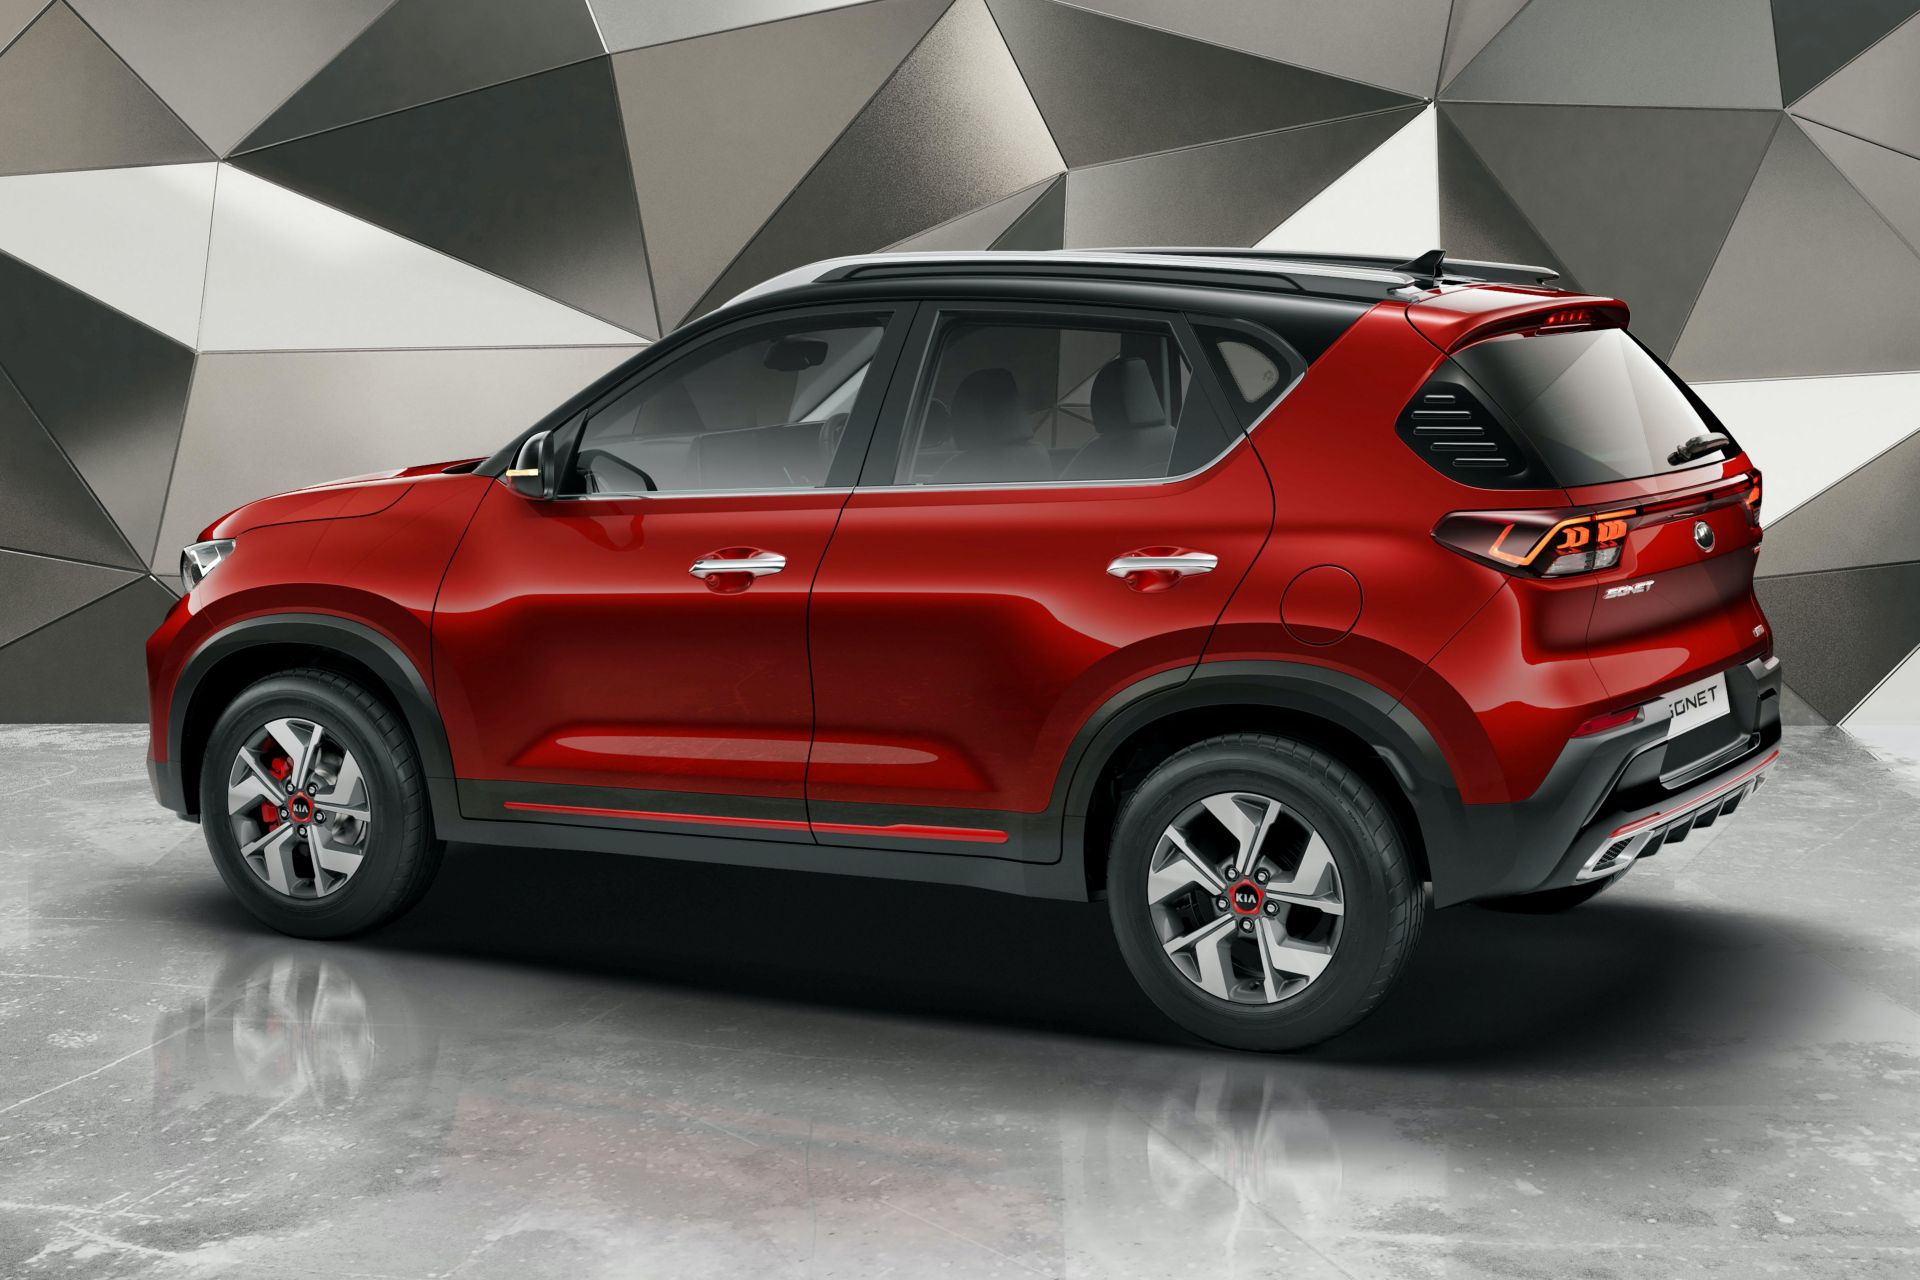 2021 Kia Encapsulates The Brand's SUV KnowHow In A Tiny Package